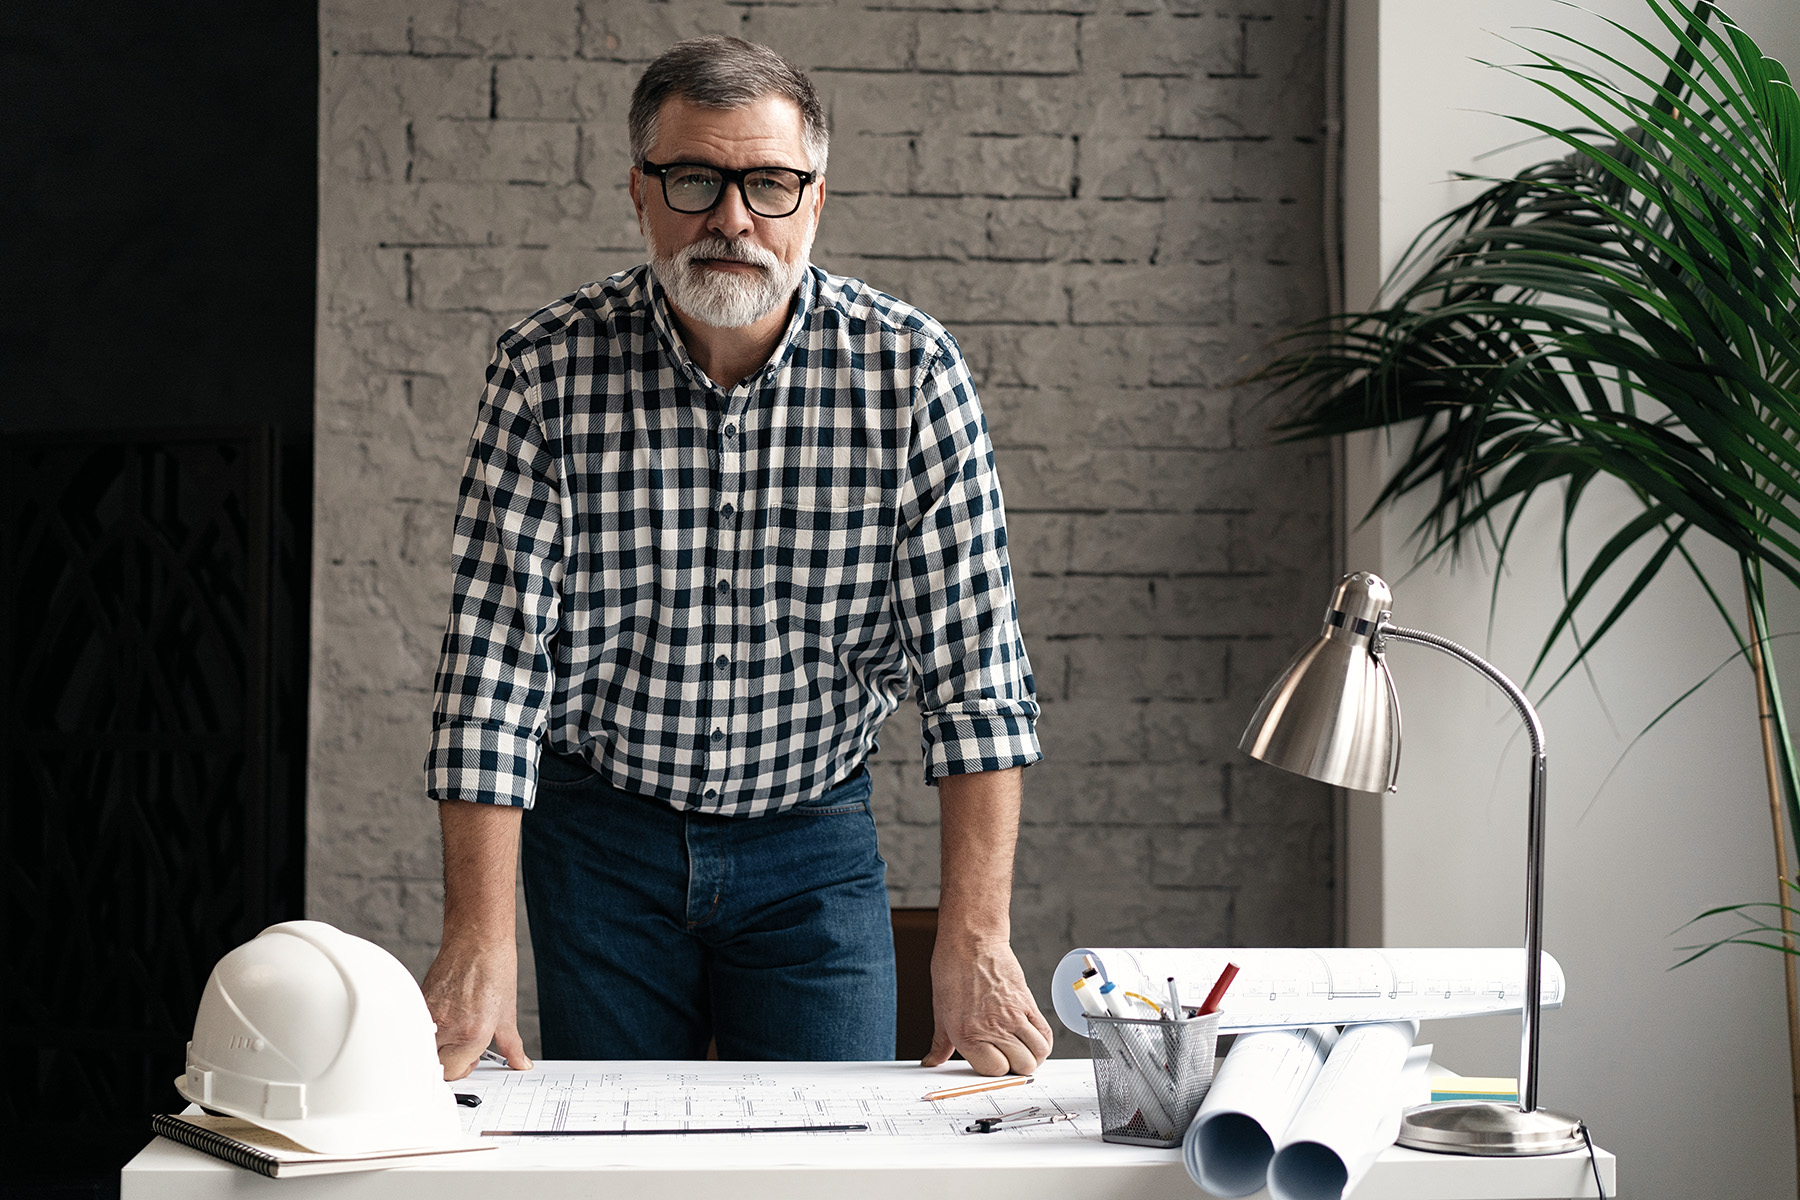 A middle-aged White man with a gray beard and black glasses, wearing a black-and-white-checkered button-down shirt leans over an architectural drawing on a table. 